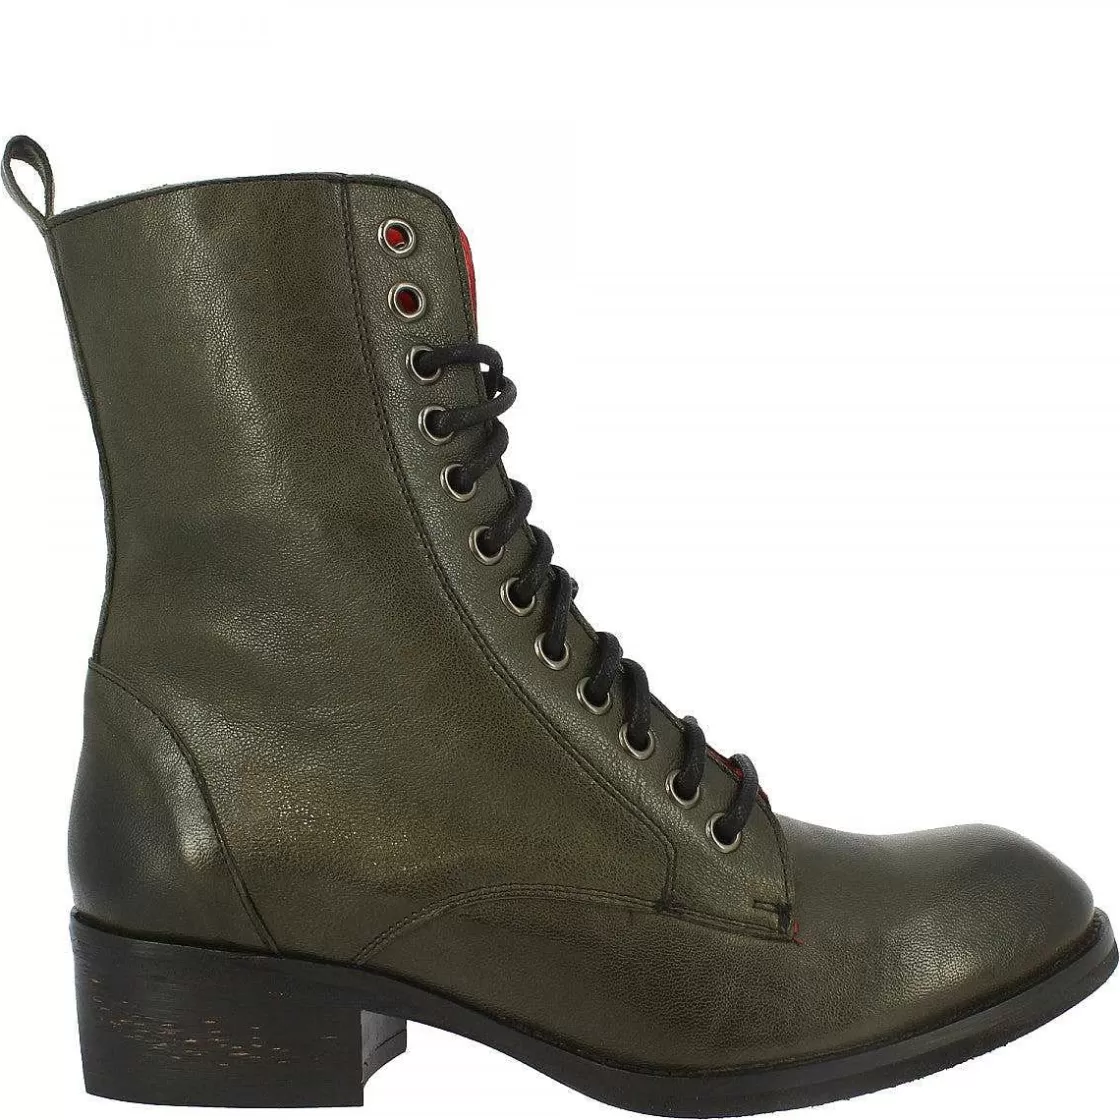 Leonardo Women'S Handmade Lace-Up Ankle Boots In Green Calf Leather With Zipper New